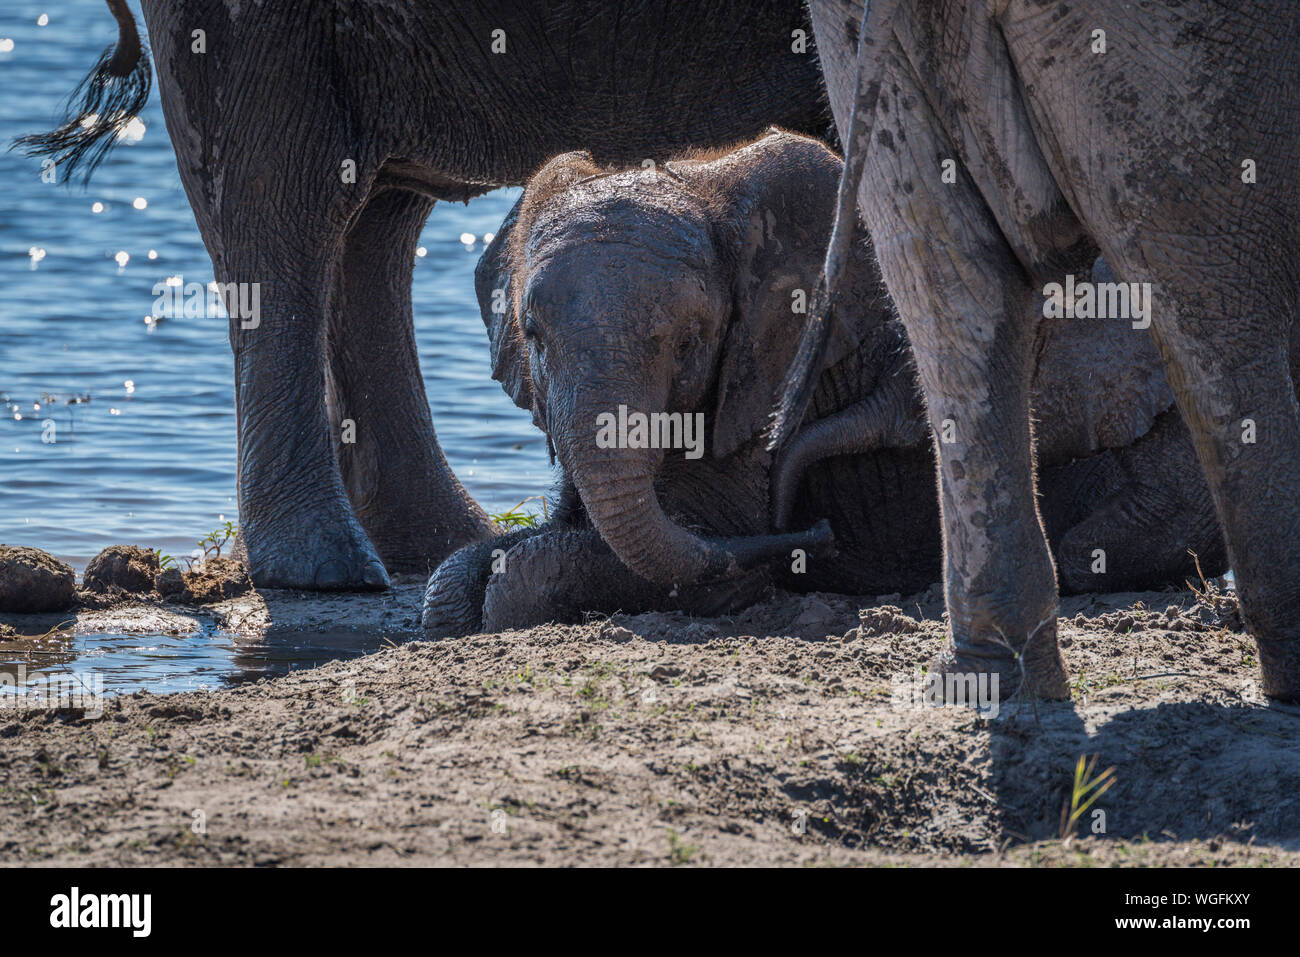 African Elephant At Waterhole In Forest Stock Photo